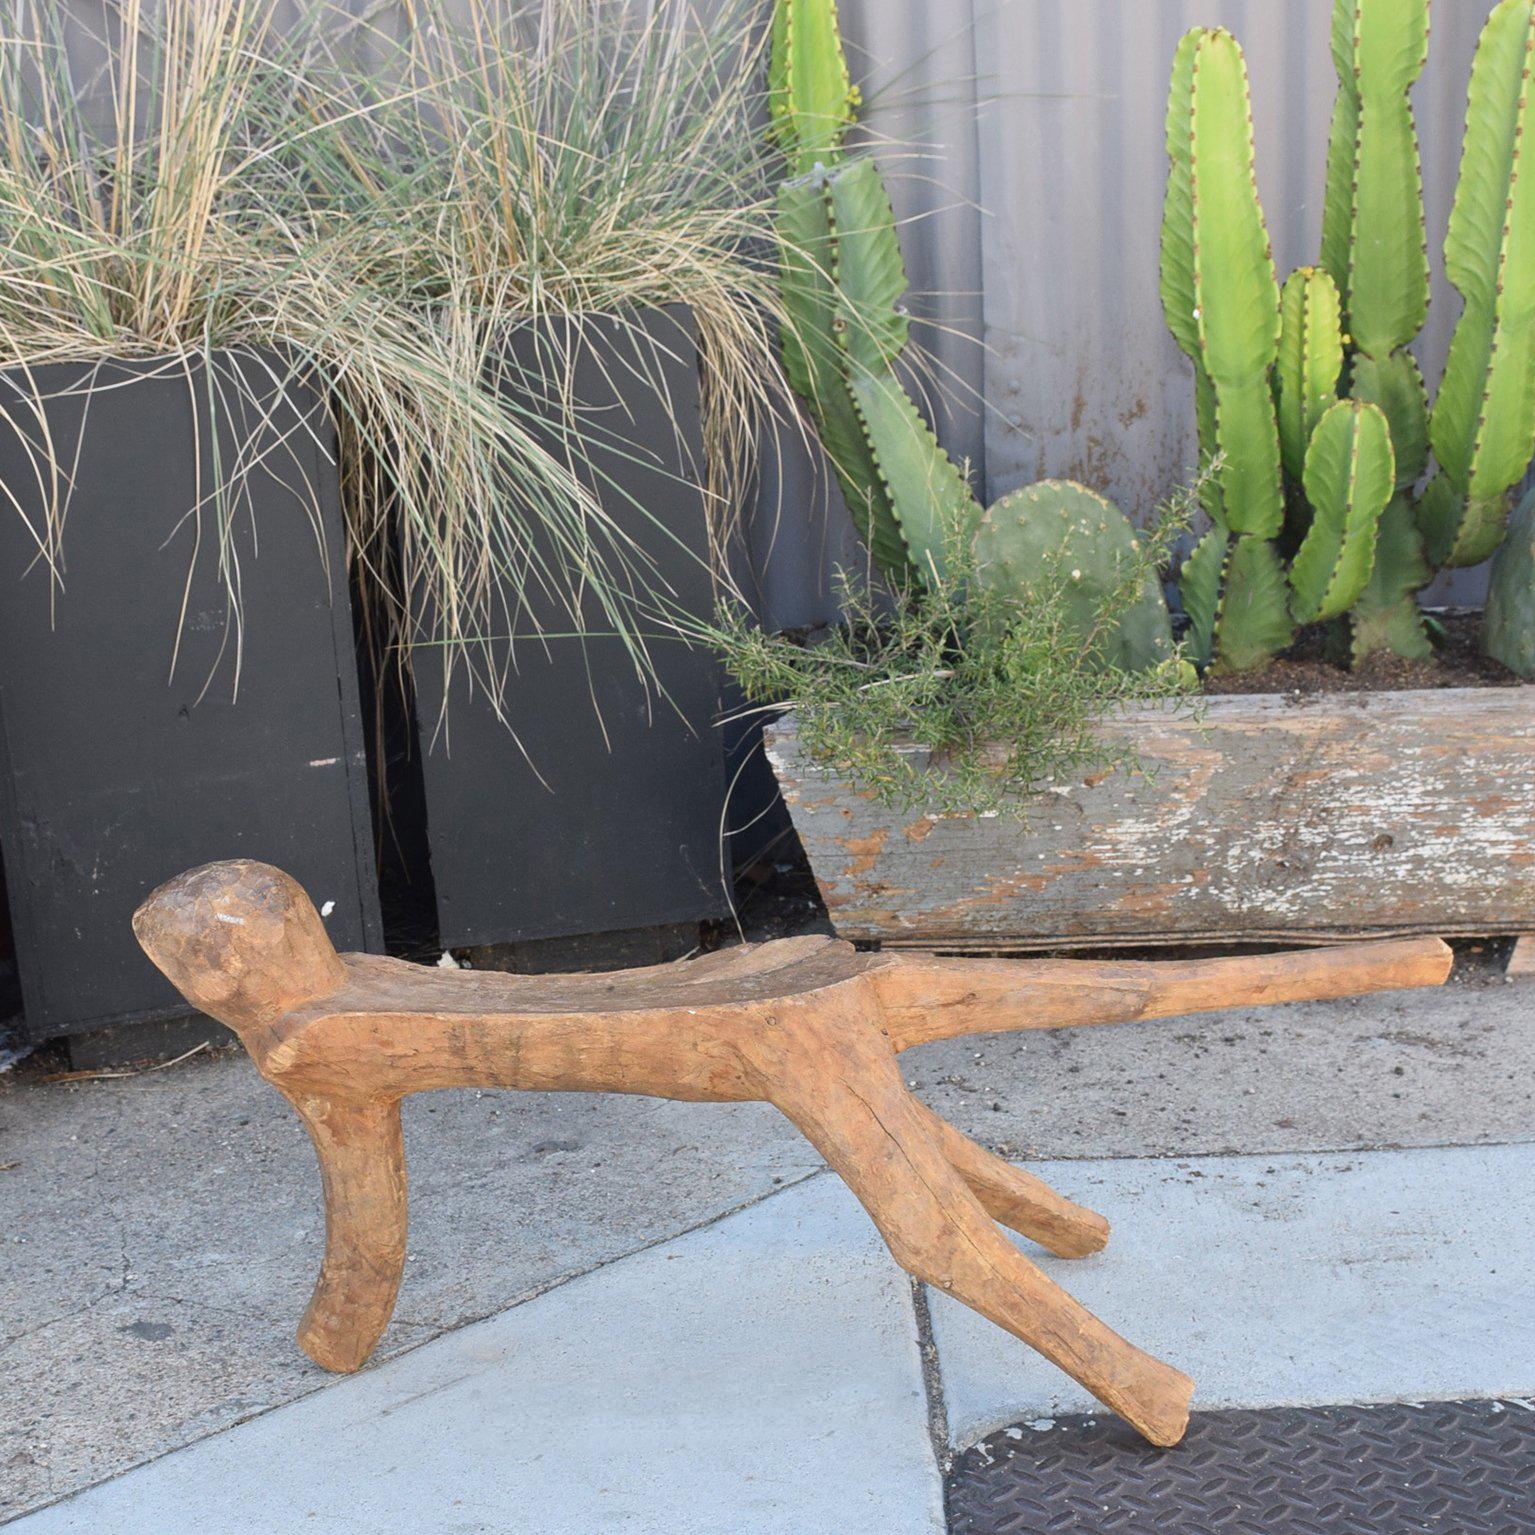 For your consideration, an organic animal wood sculpture. It can be used as a side table or stool.
Dimensions: 11 1/2